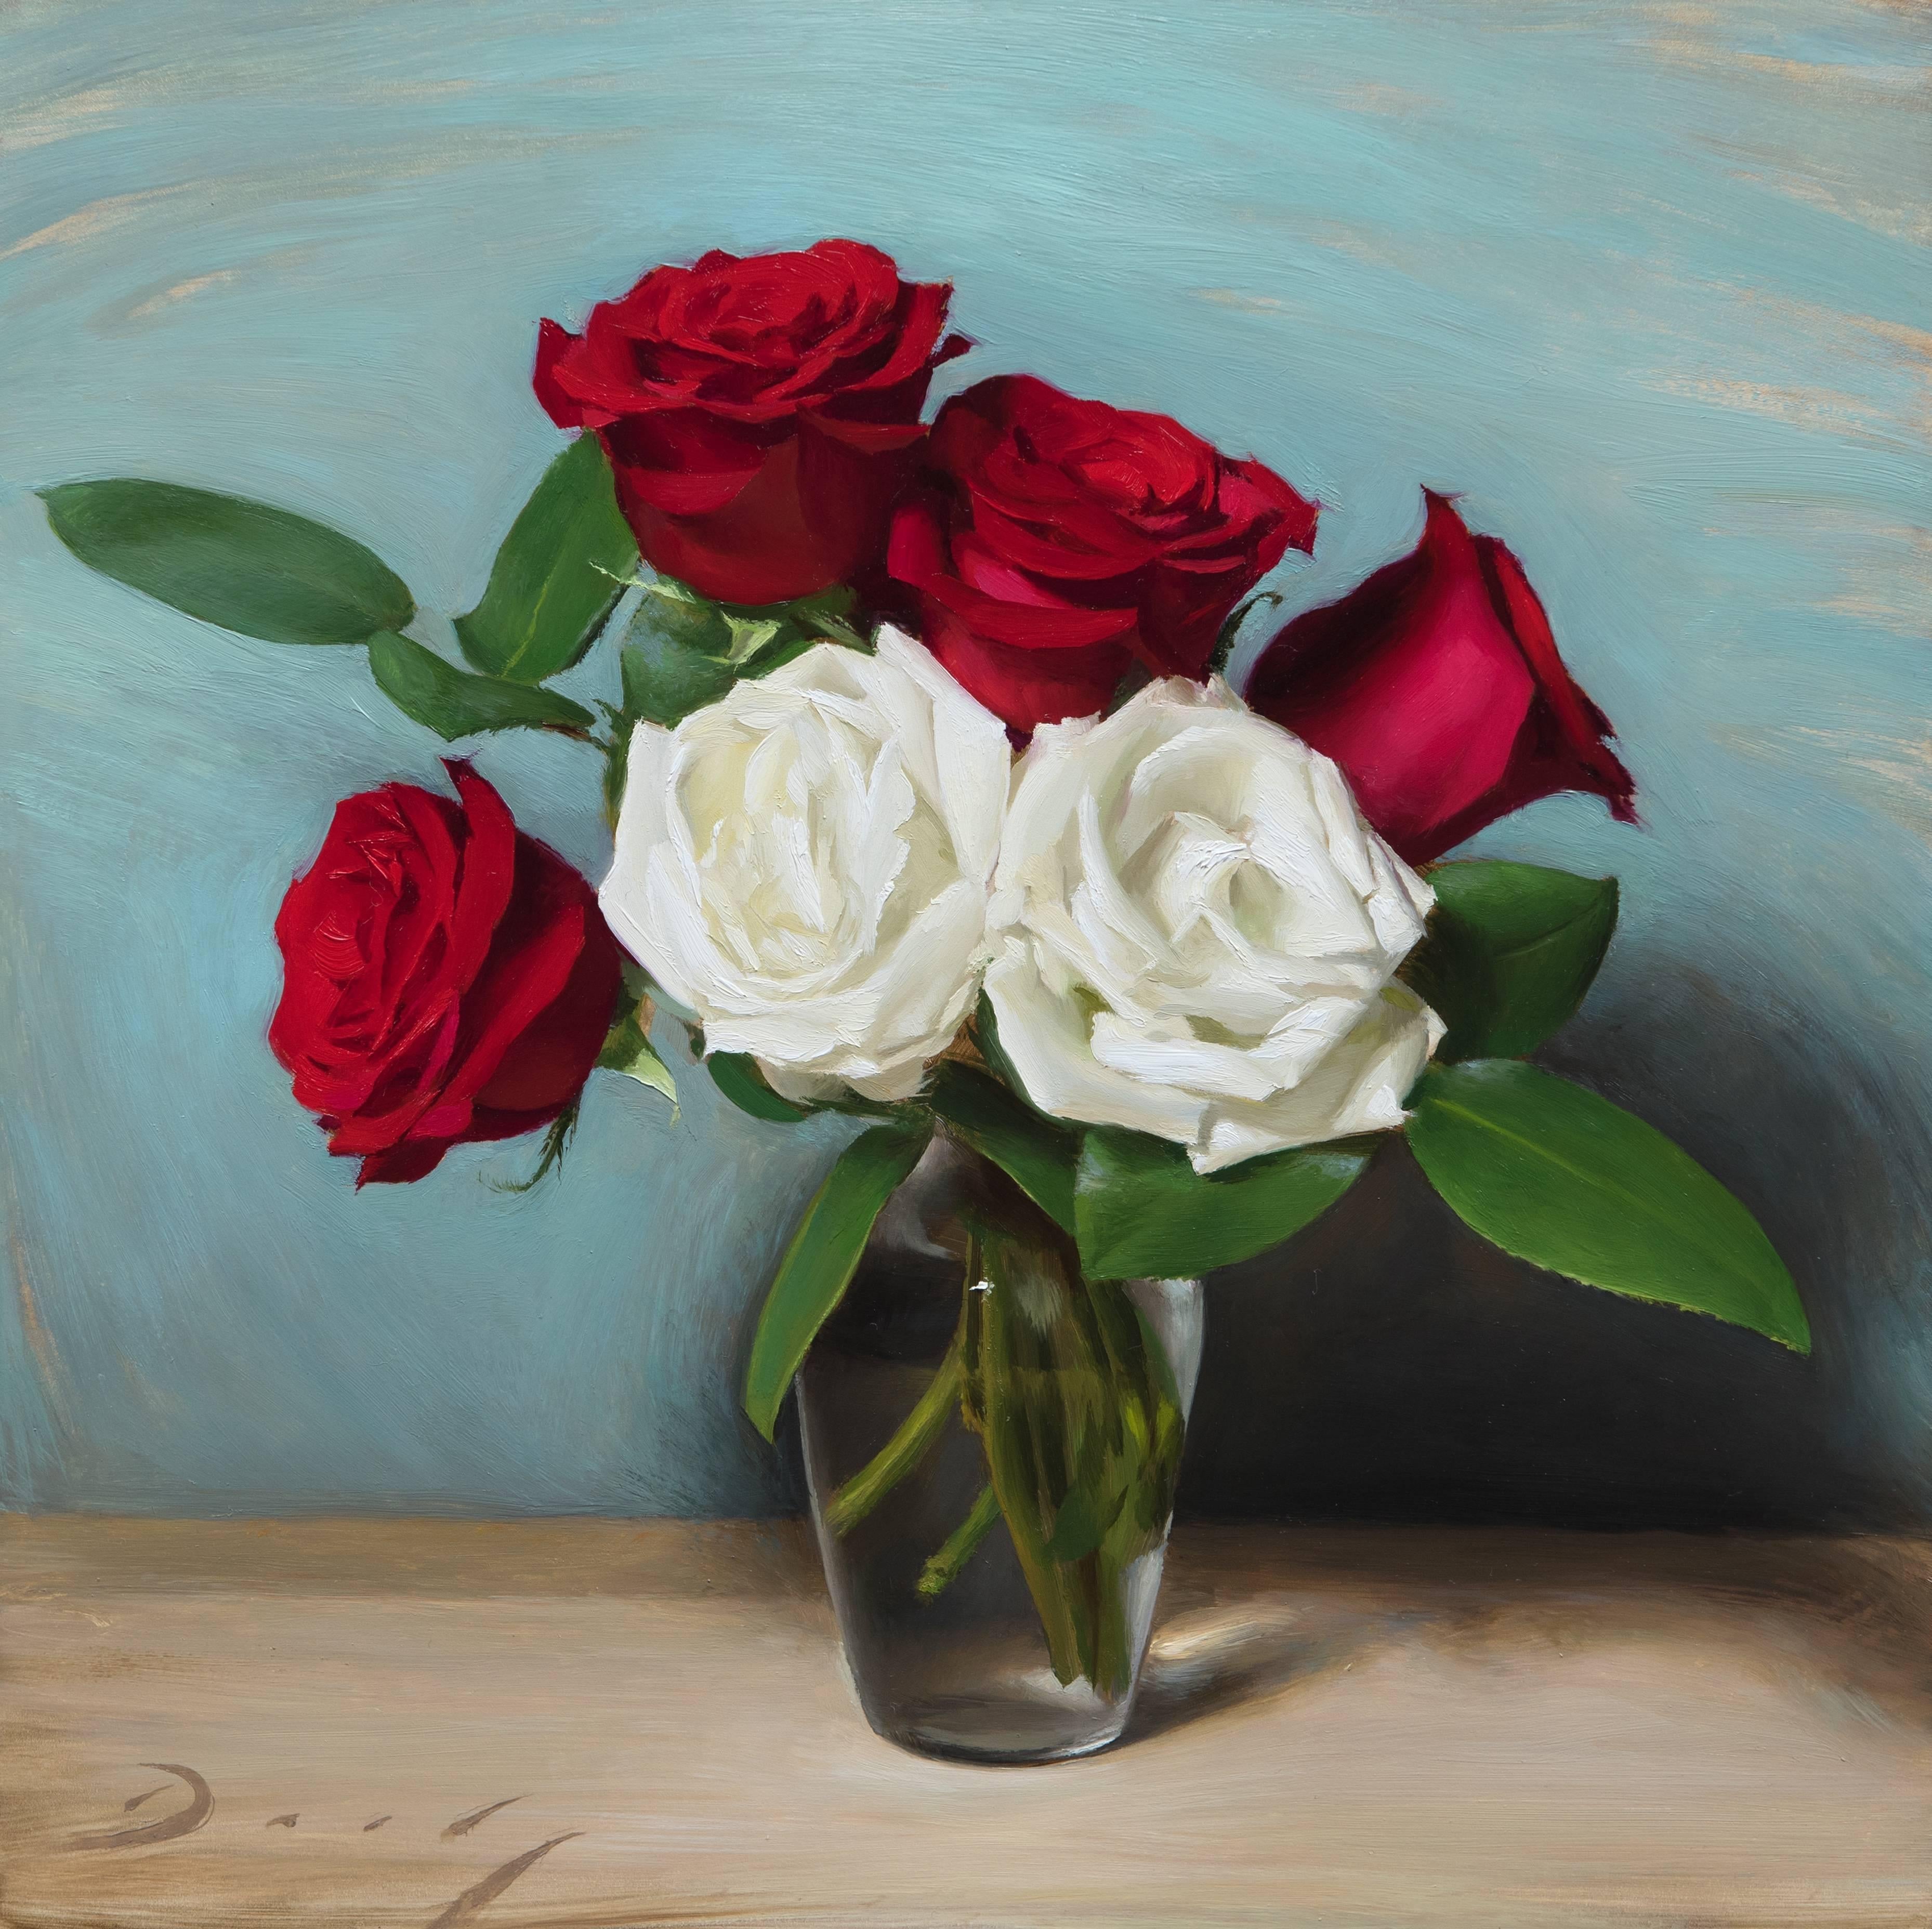 Joseph Q. Daily Still-Life Painting - Realist still-life with red and white roses, "Curtain Call", oil on panel, 2017